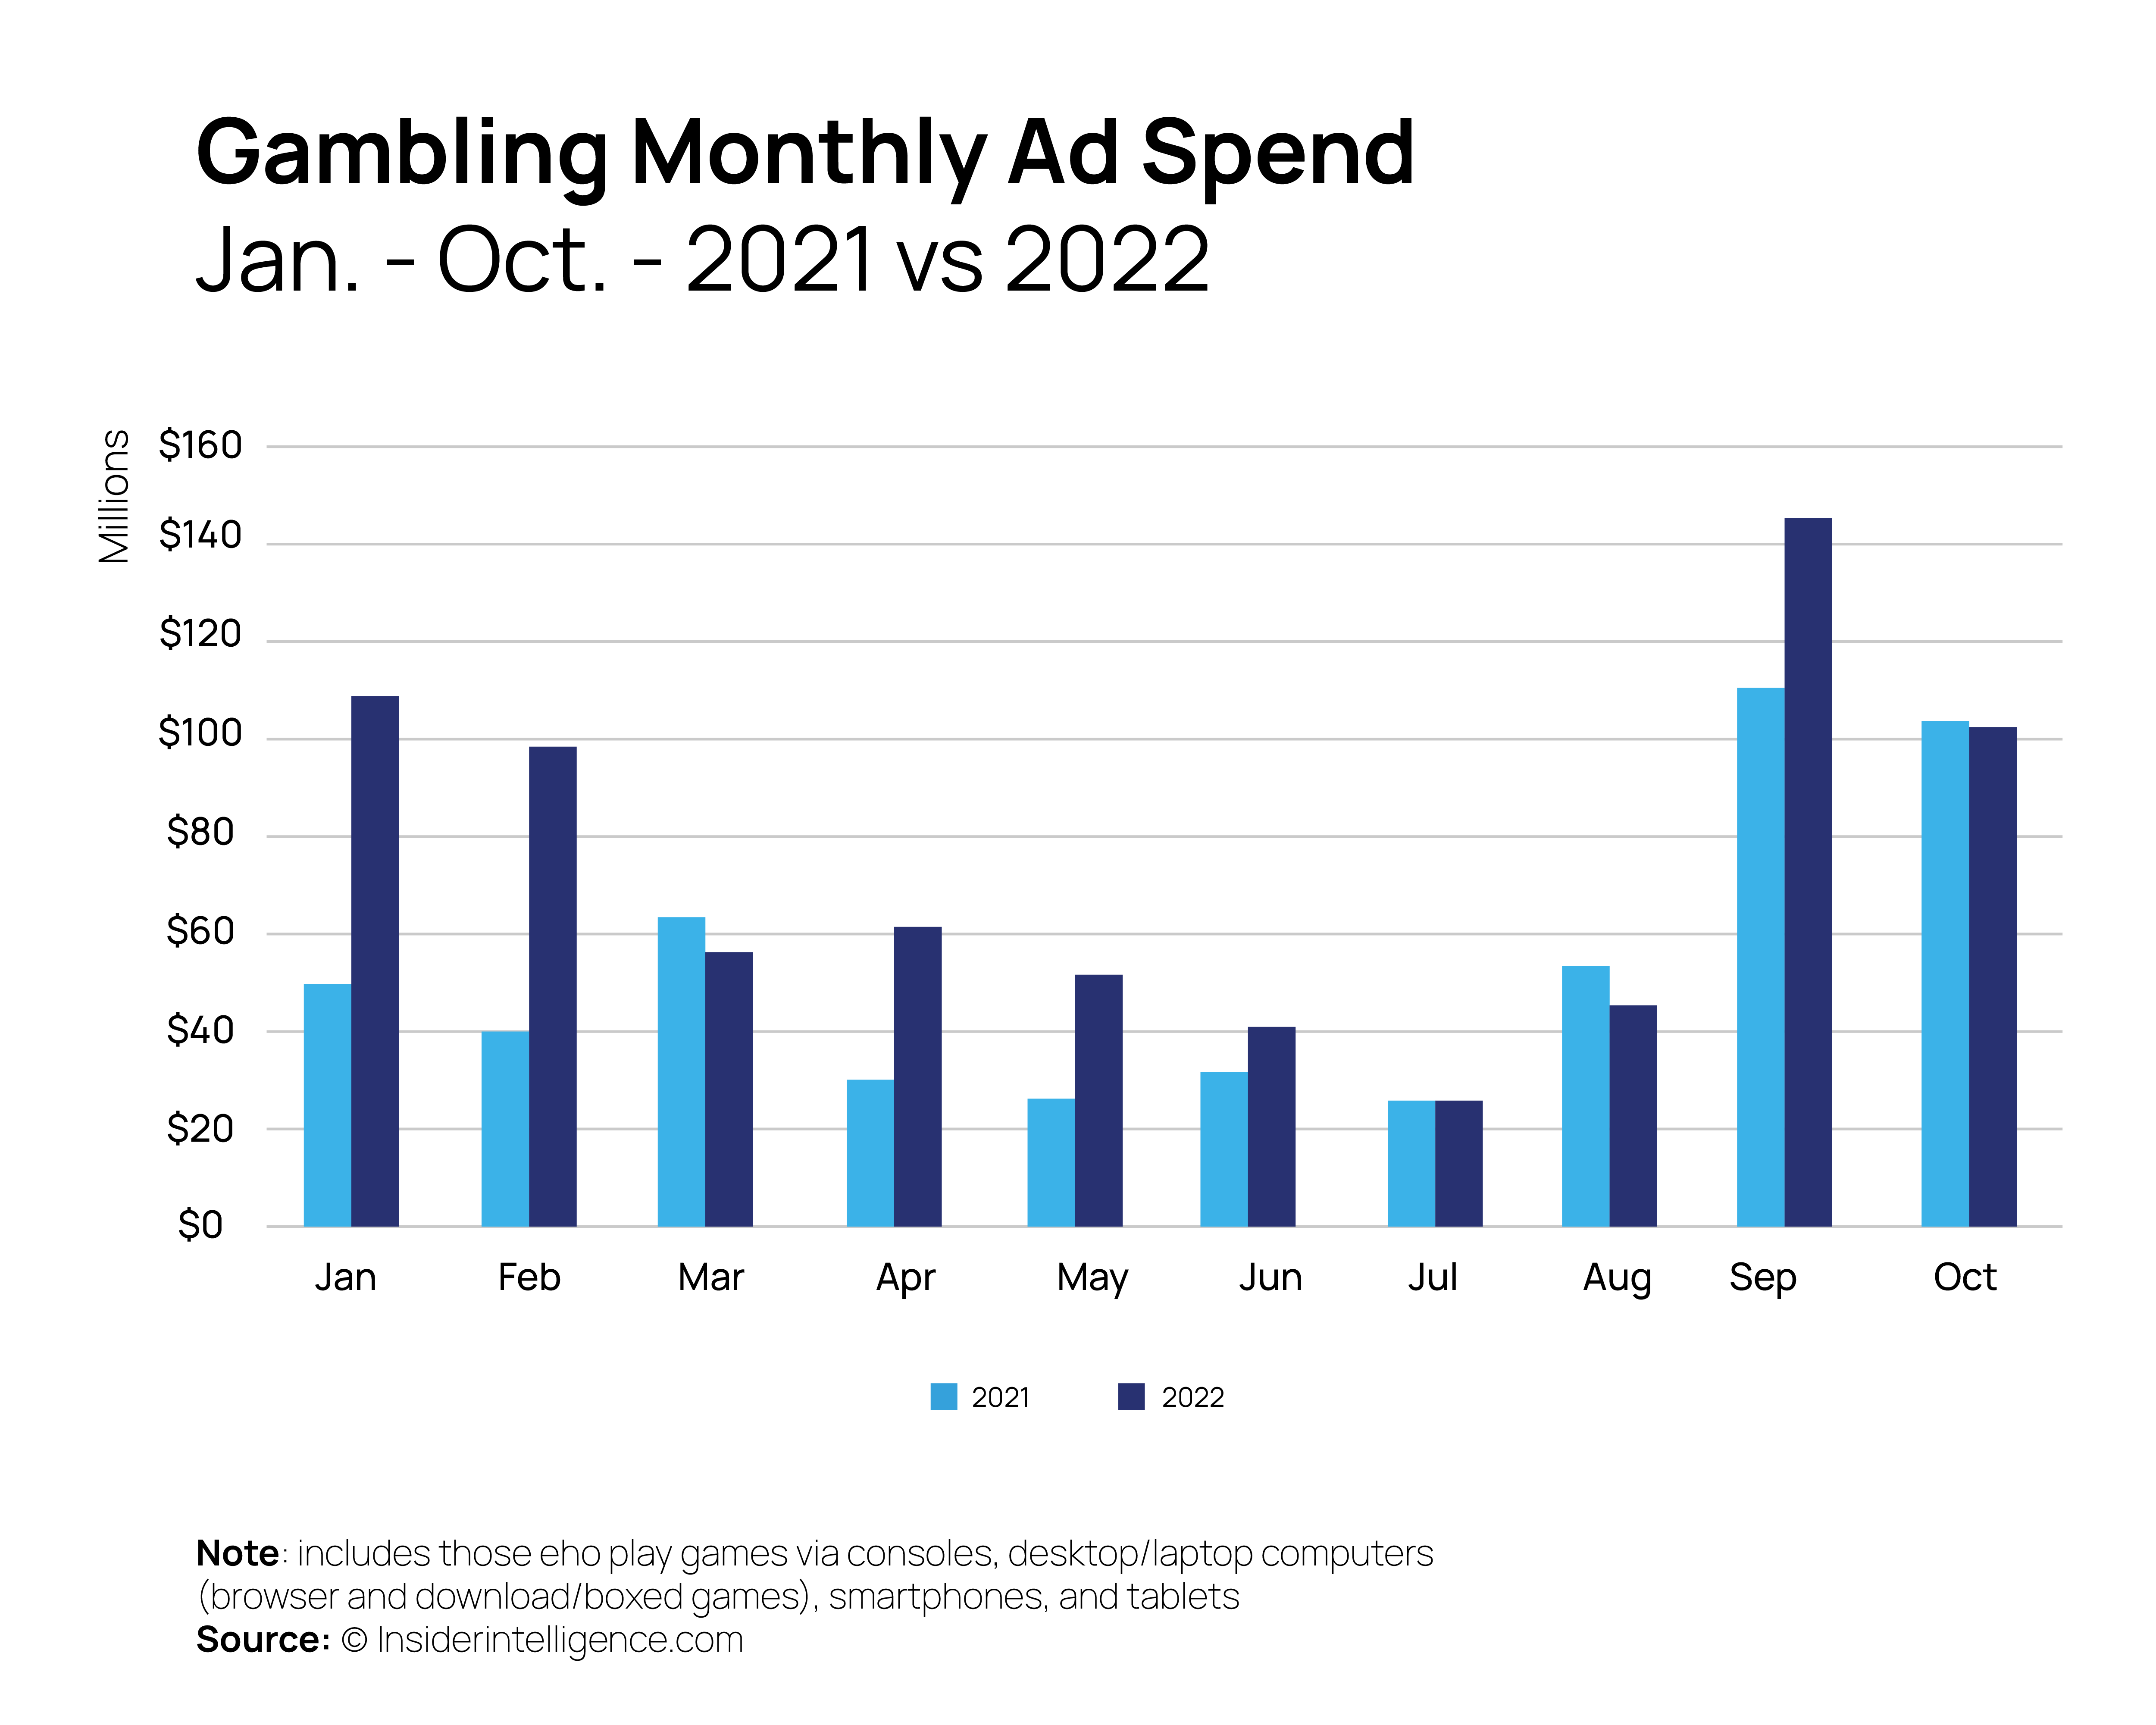 how much gambling spend on advertising per month 